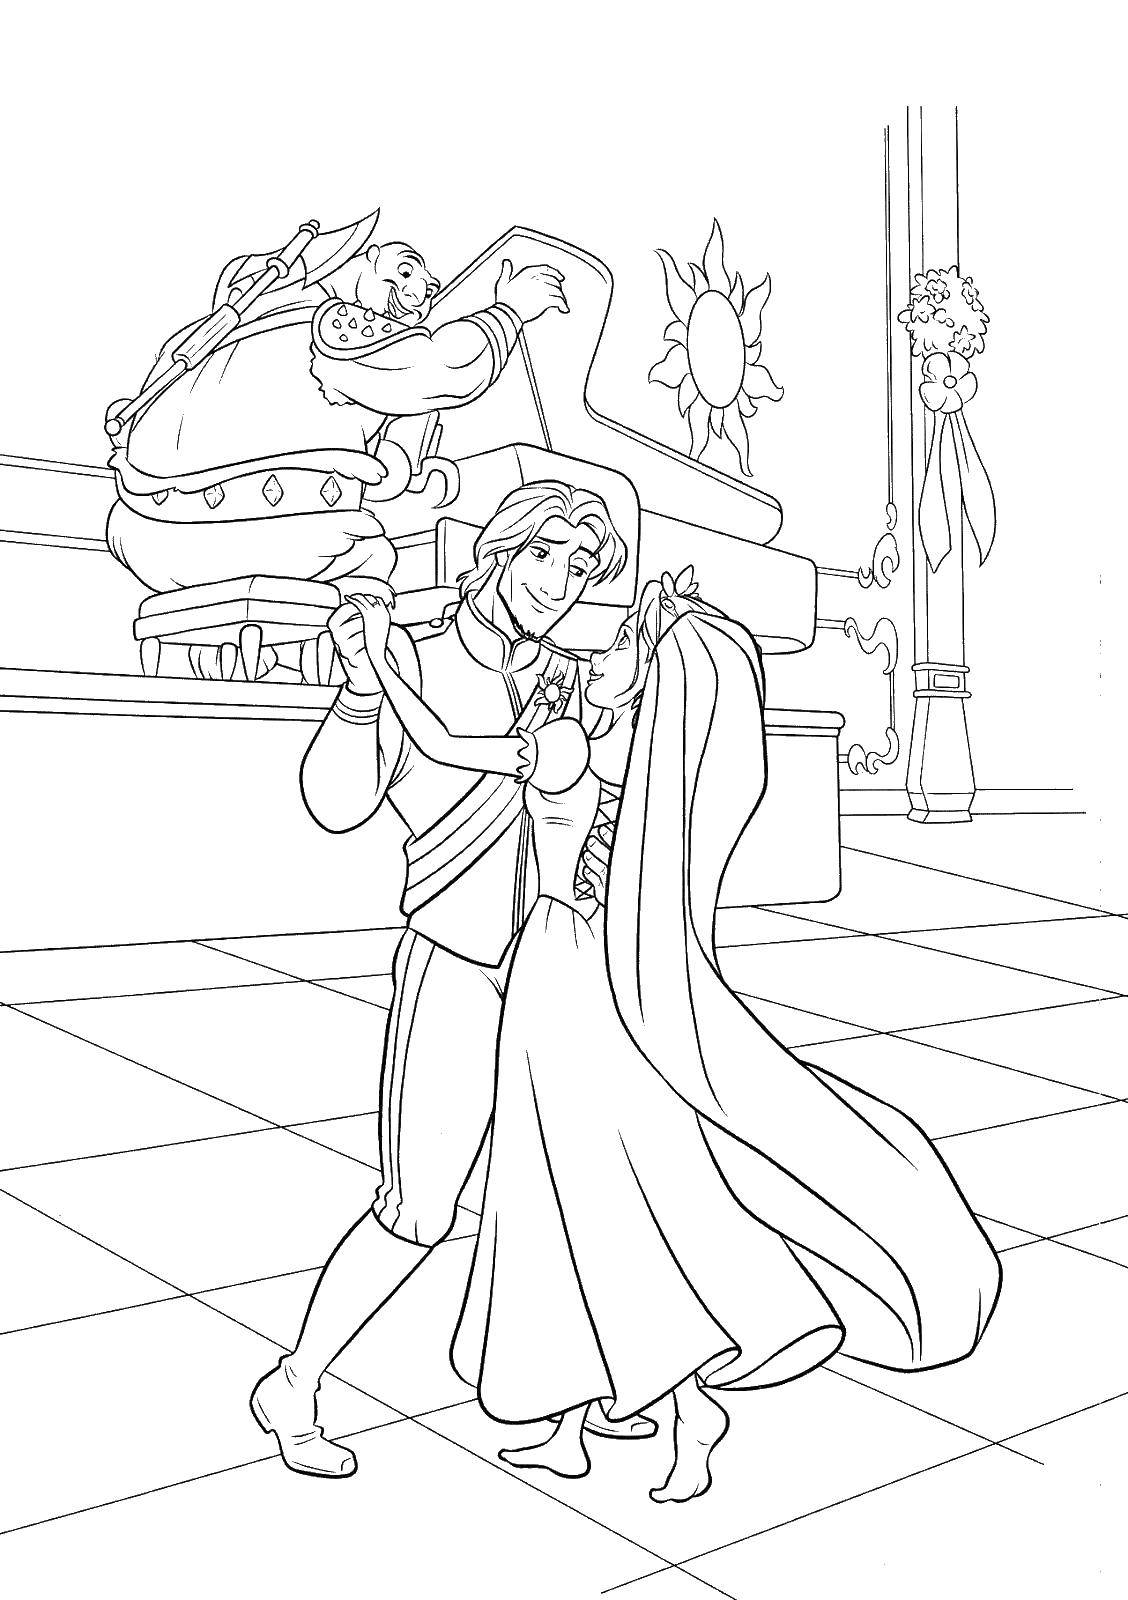 Coloring Rapunzel is dancing at the wedding. Category coloring pages Rapunzel tangled. Tags:  Rapunzel , wedding.